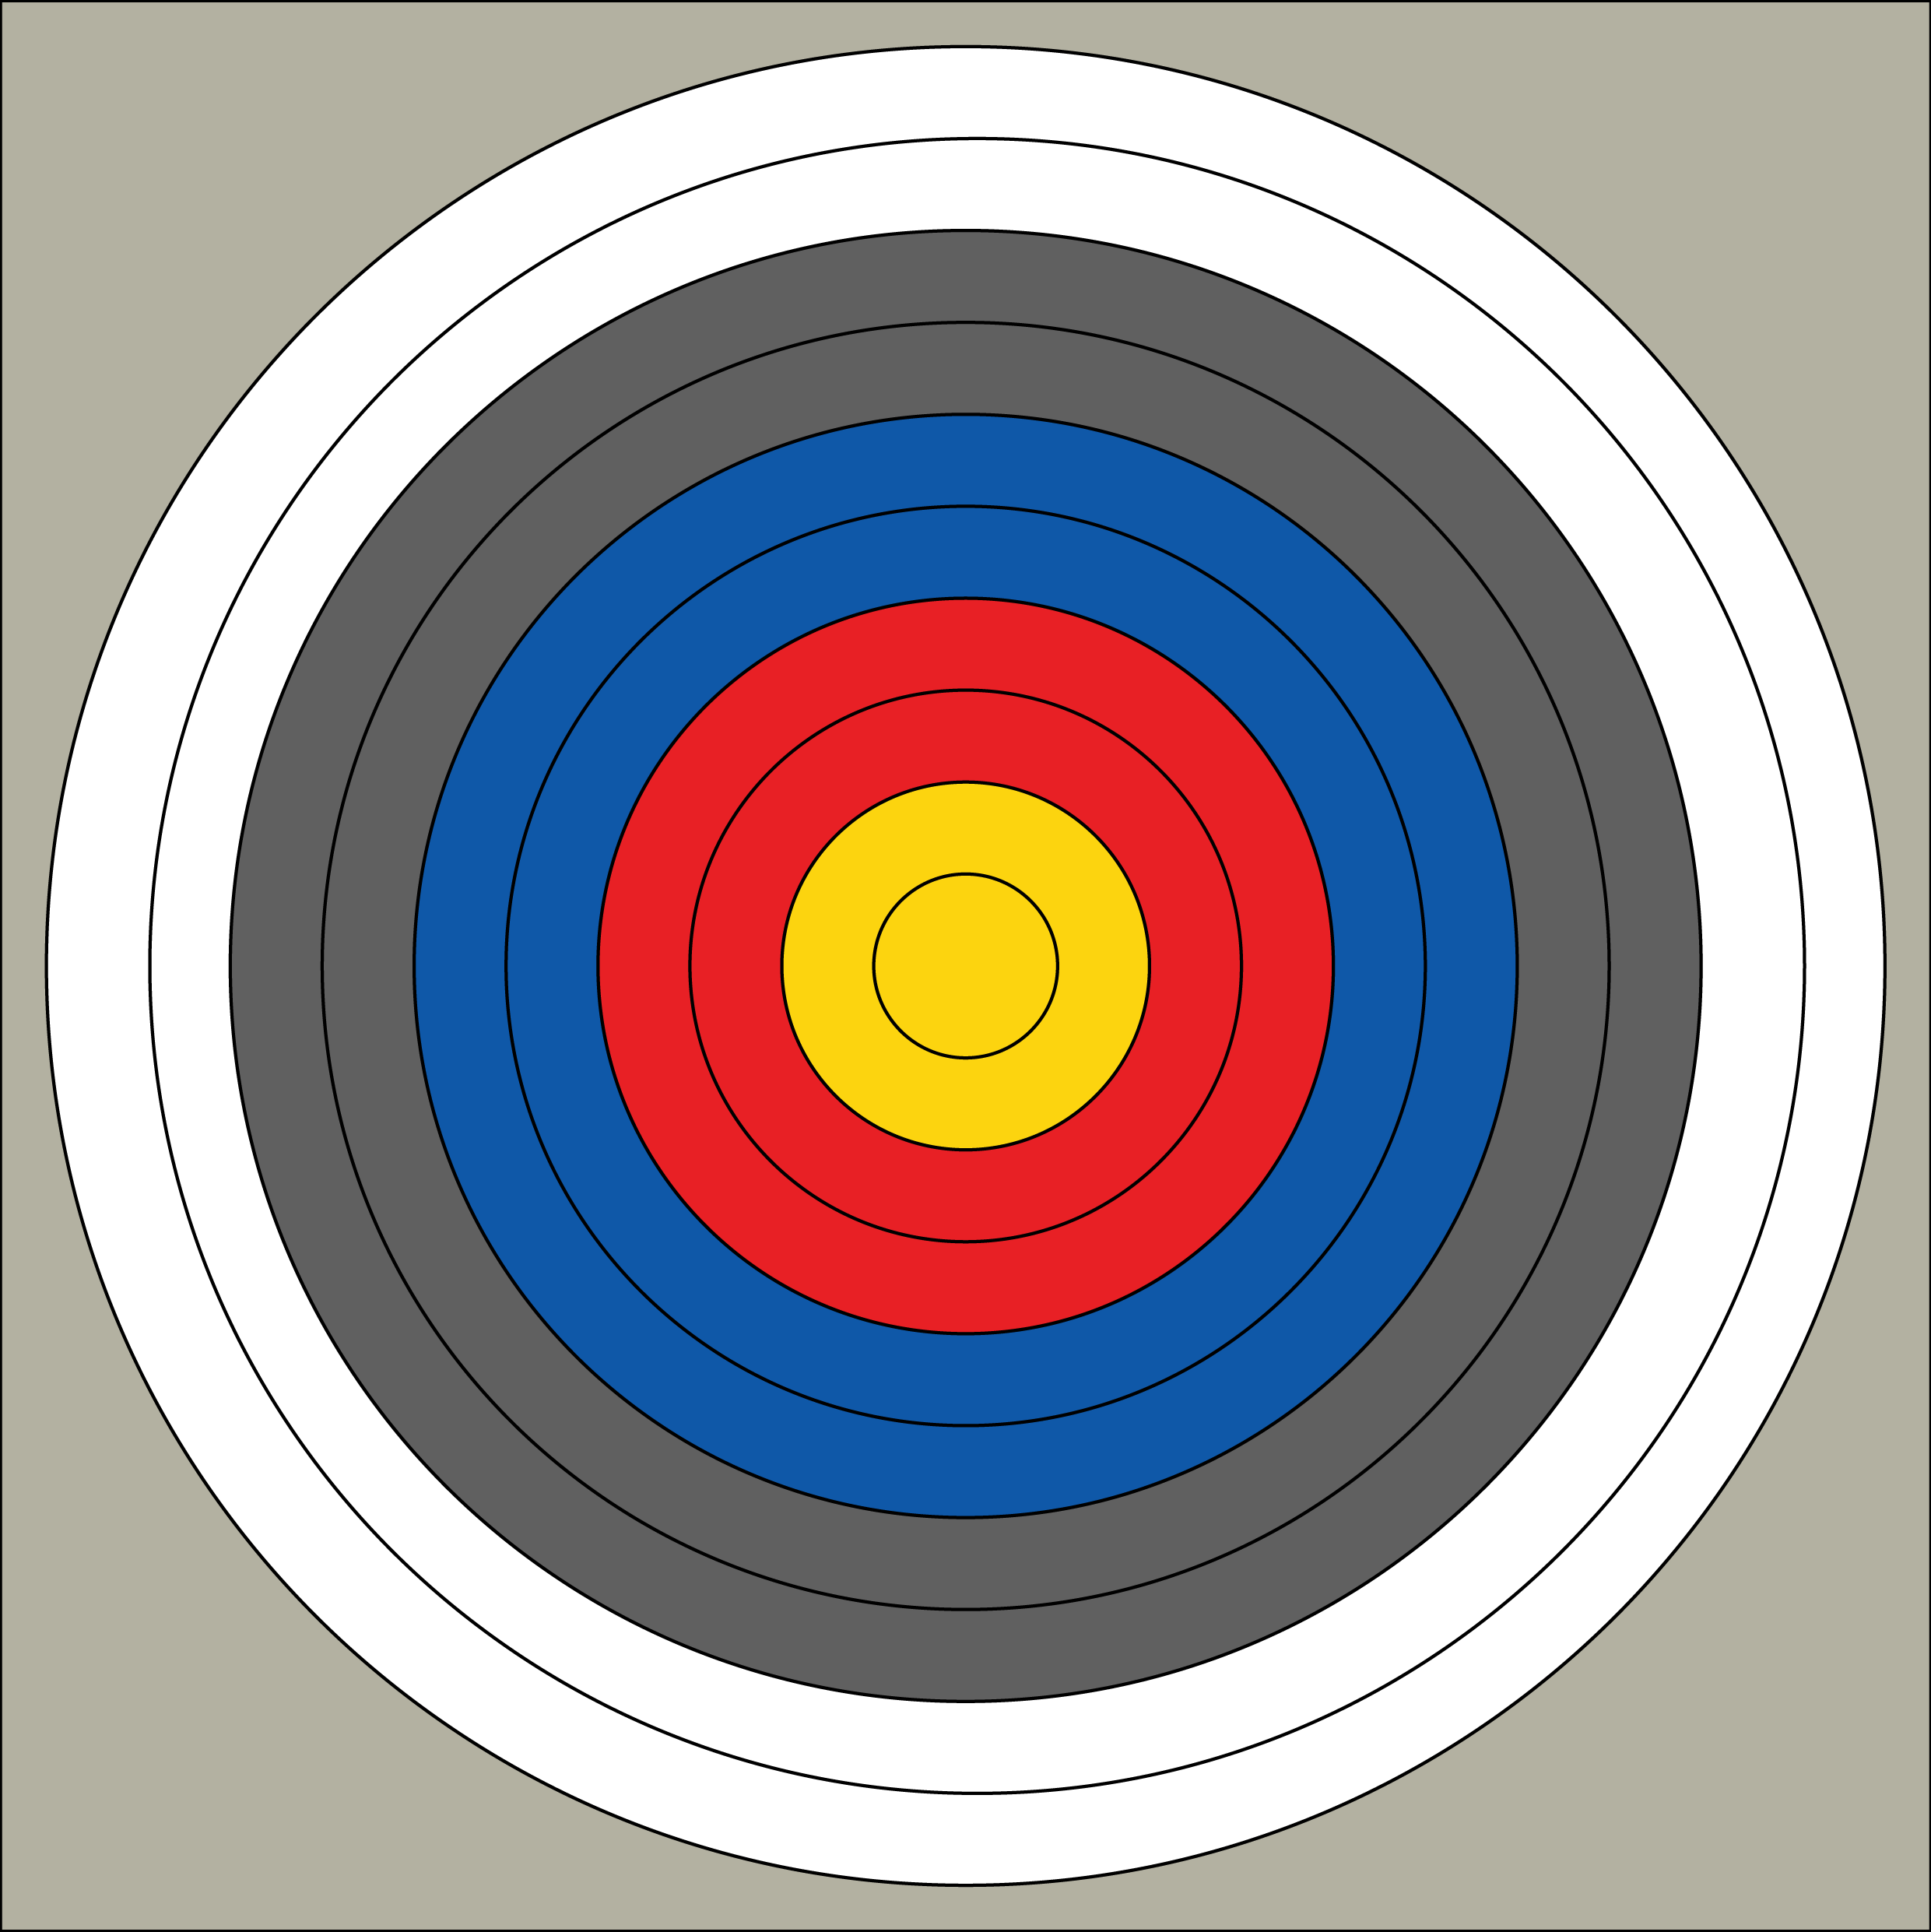 General 2481x2482 targets blue red yellow circle gray